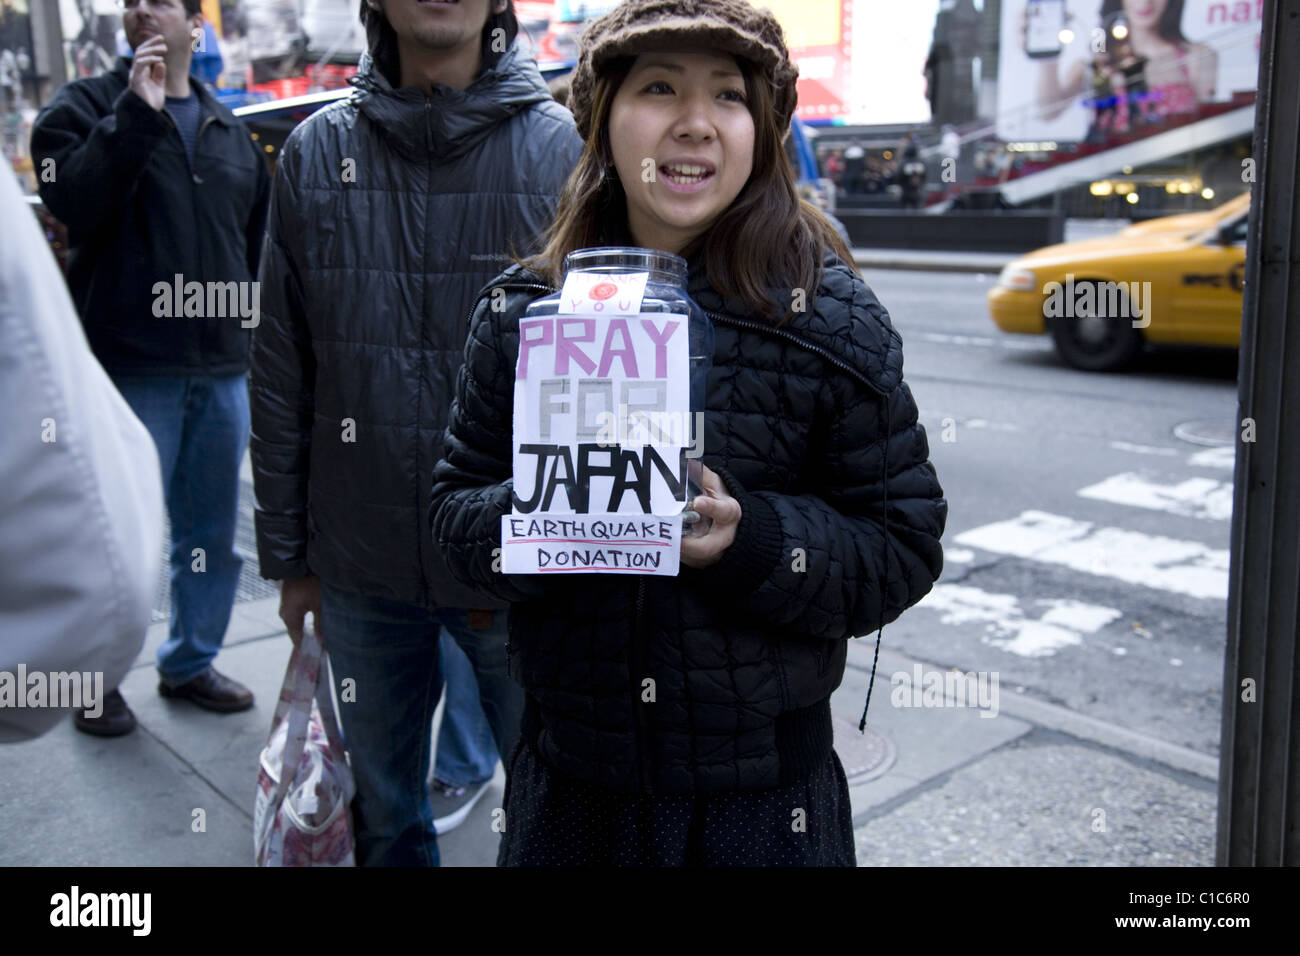 March 12, 2011: Japanese woman asks for donations for Japanese earthquake victims in Times Square, New York City. Stock Photo